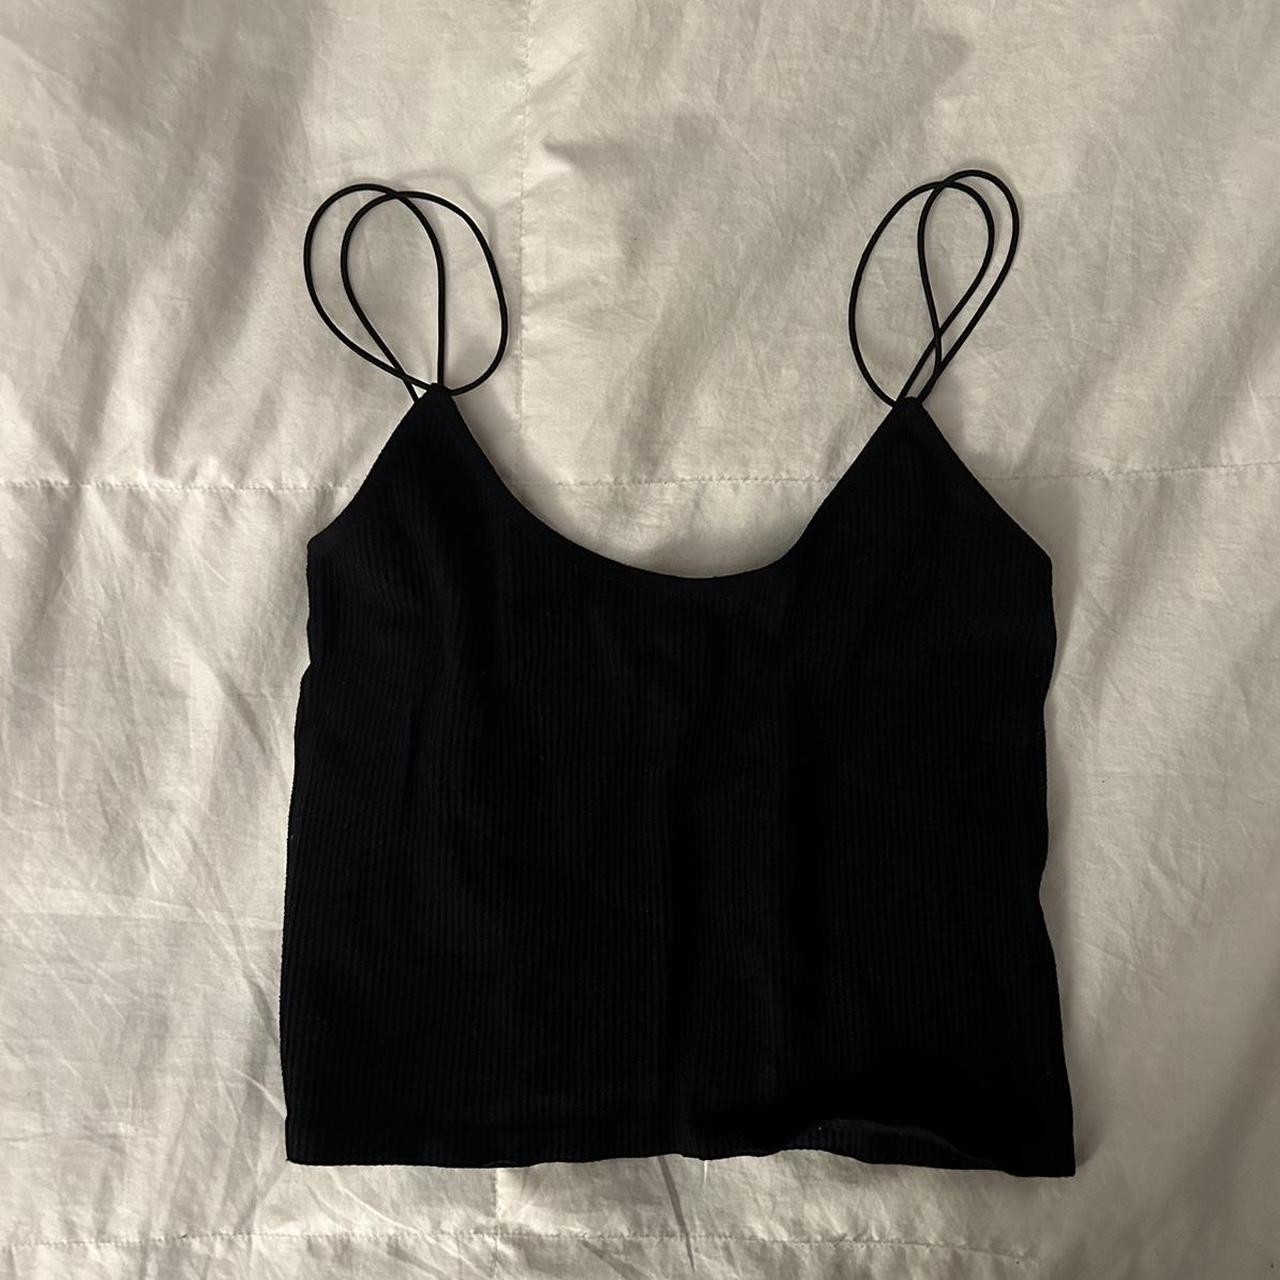 Zara seamless crop top🖤 So cute and great for... - Depop